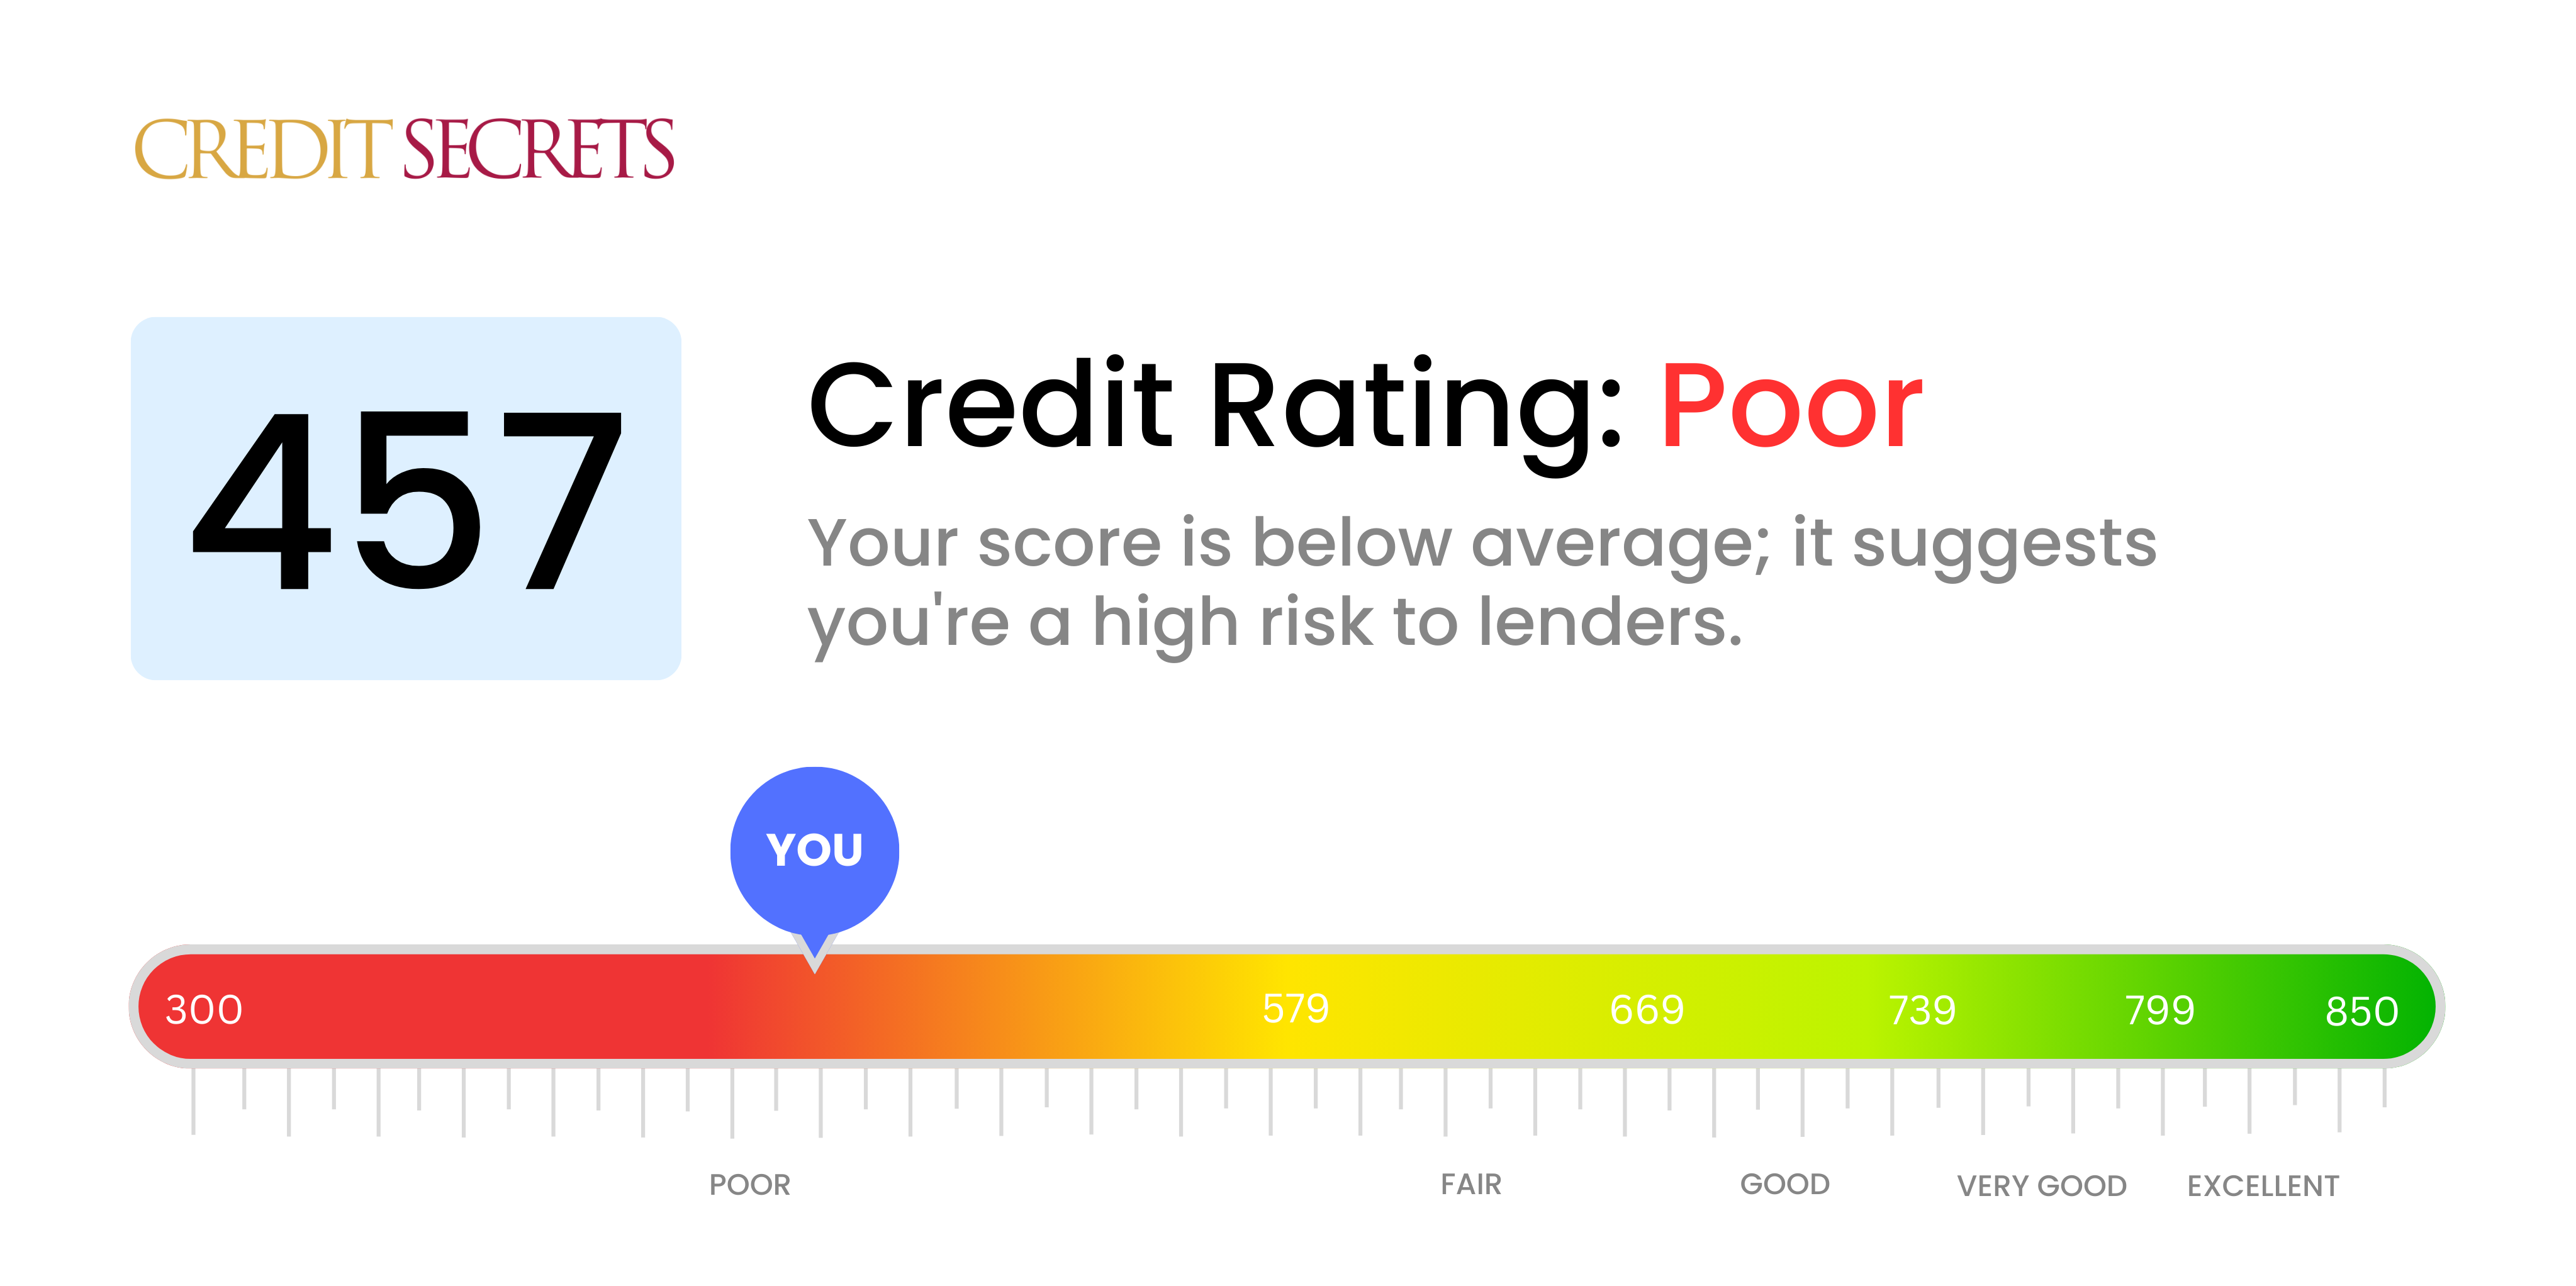 Is 457 a good credit score?